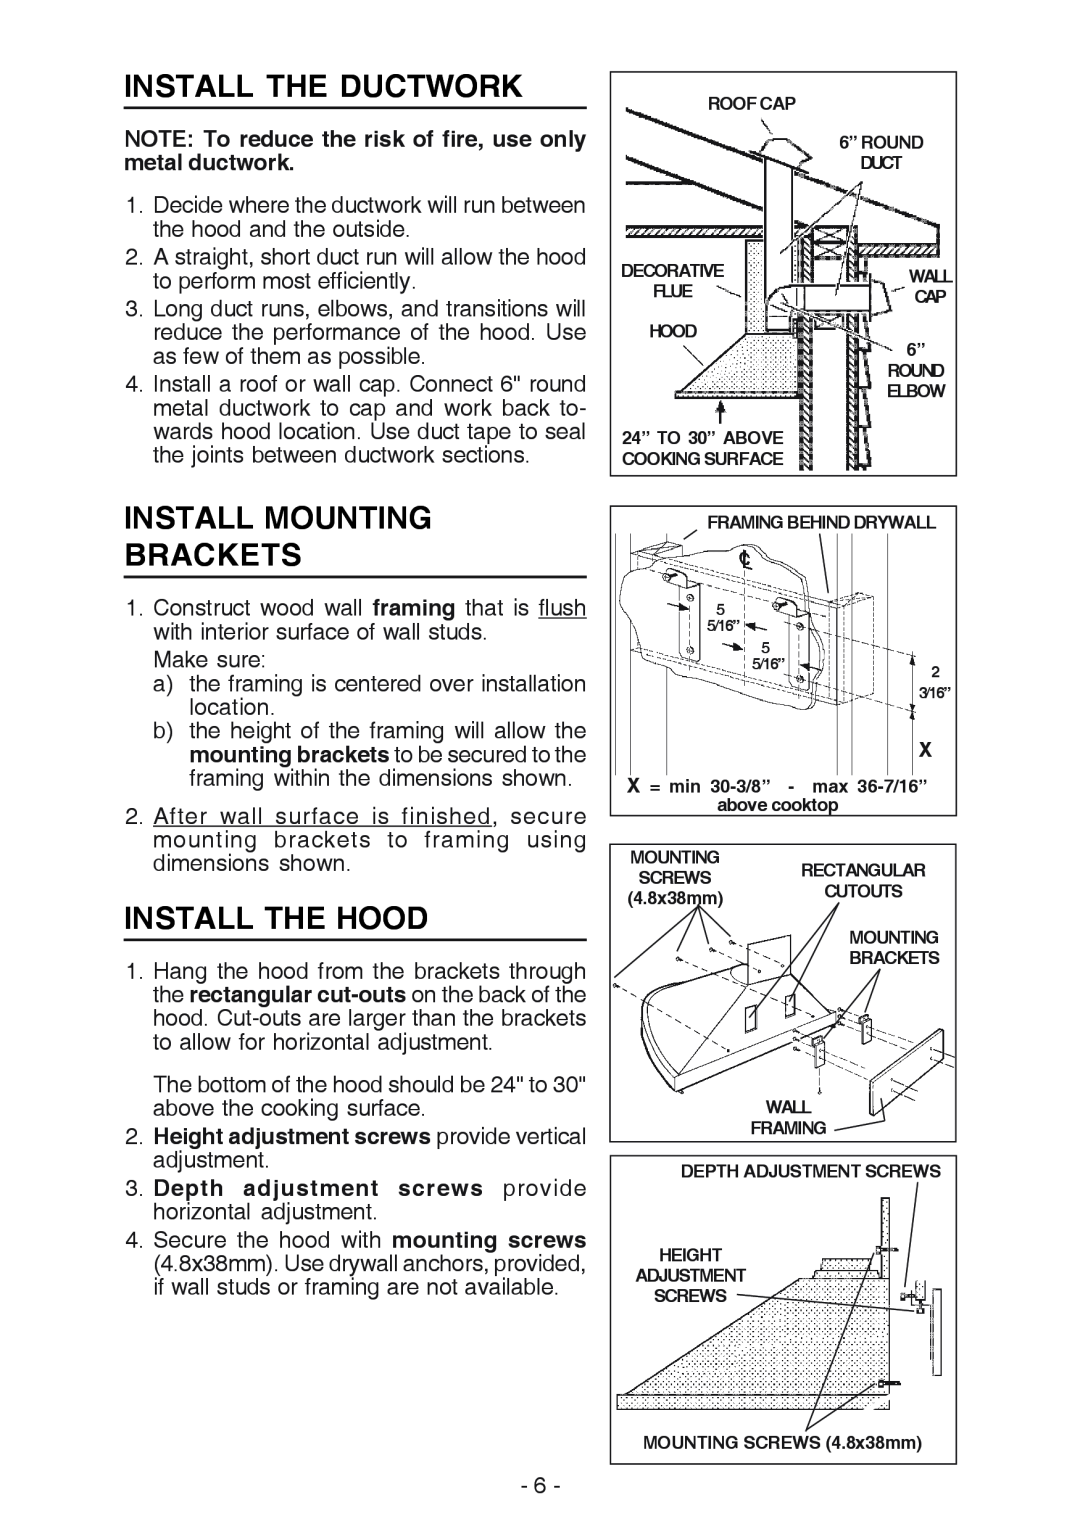 Best K15 manual Install The Ductwork, Install Mounting Brackets, Install The Hood 